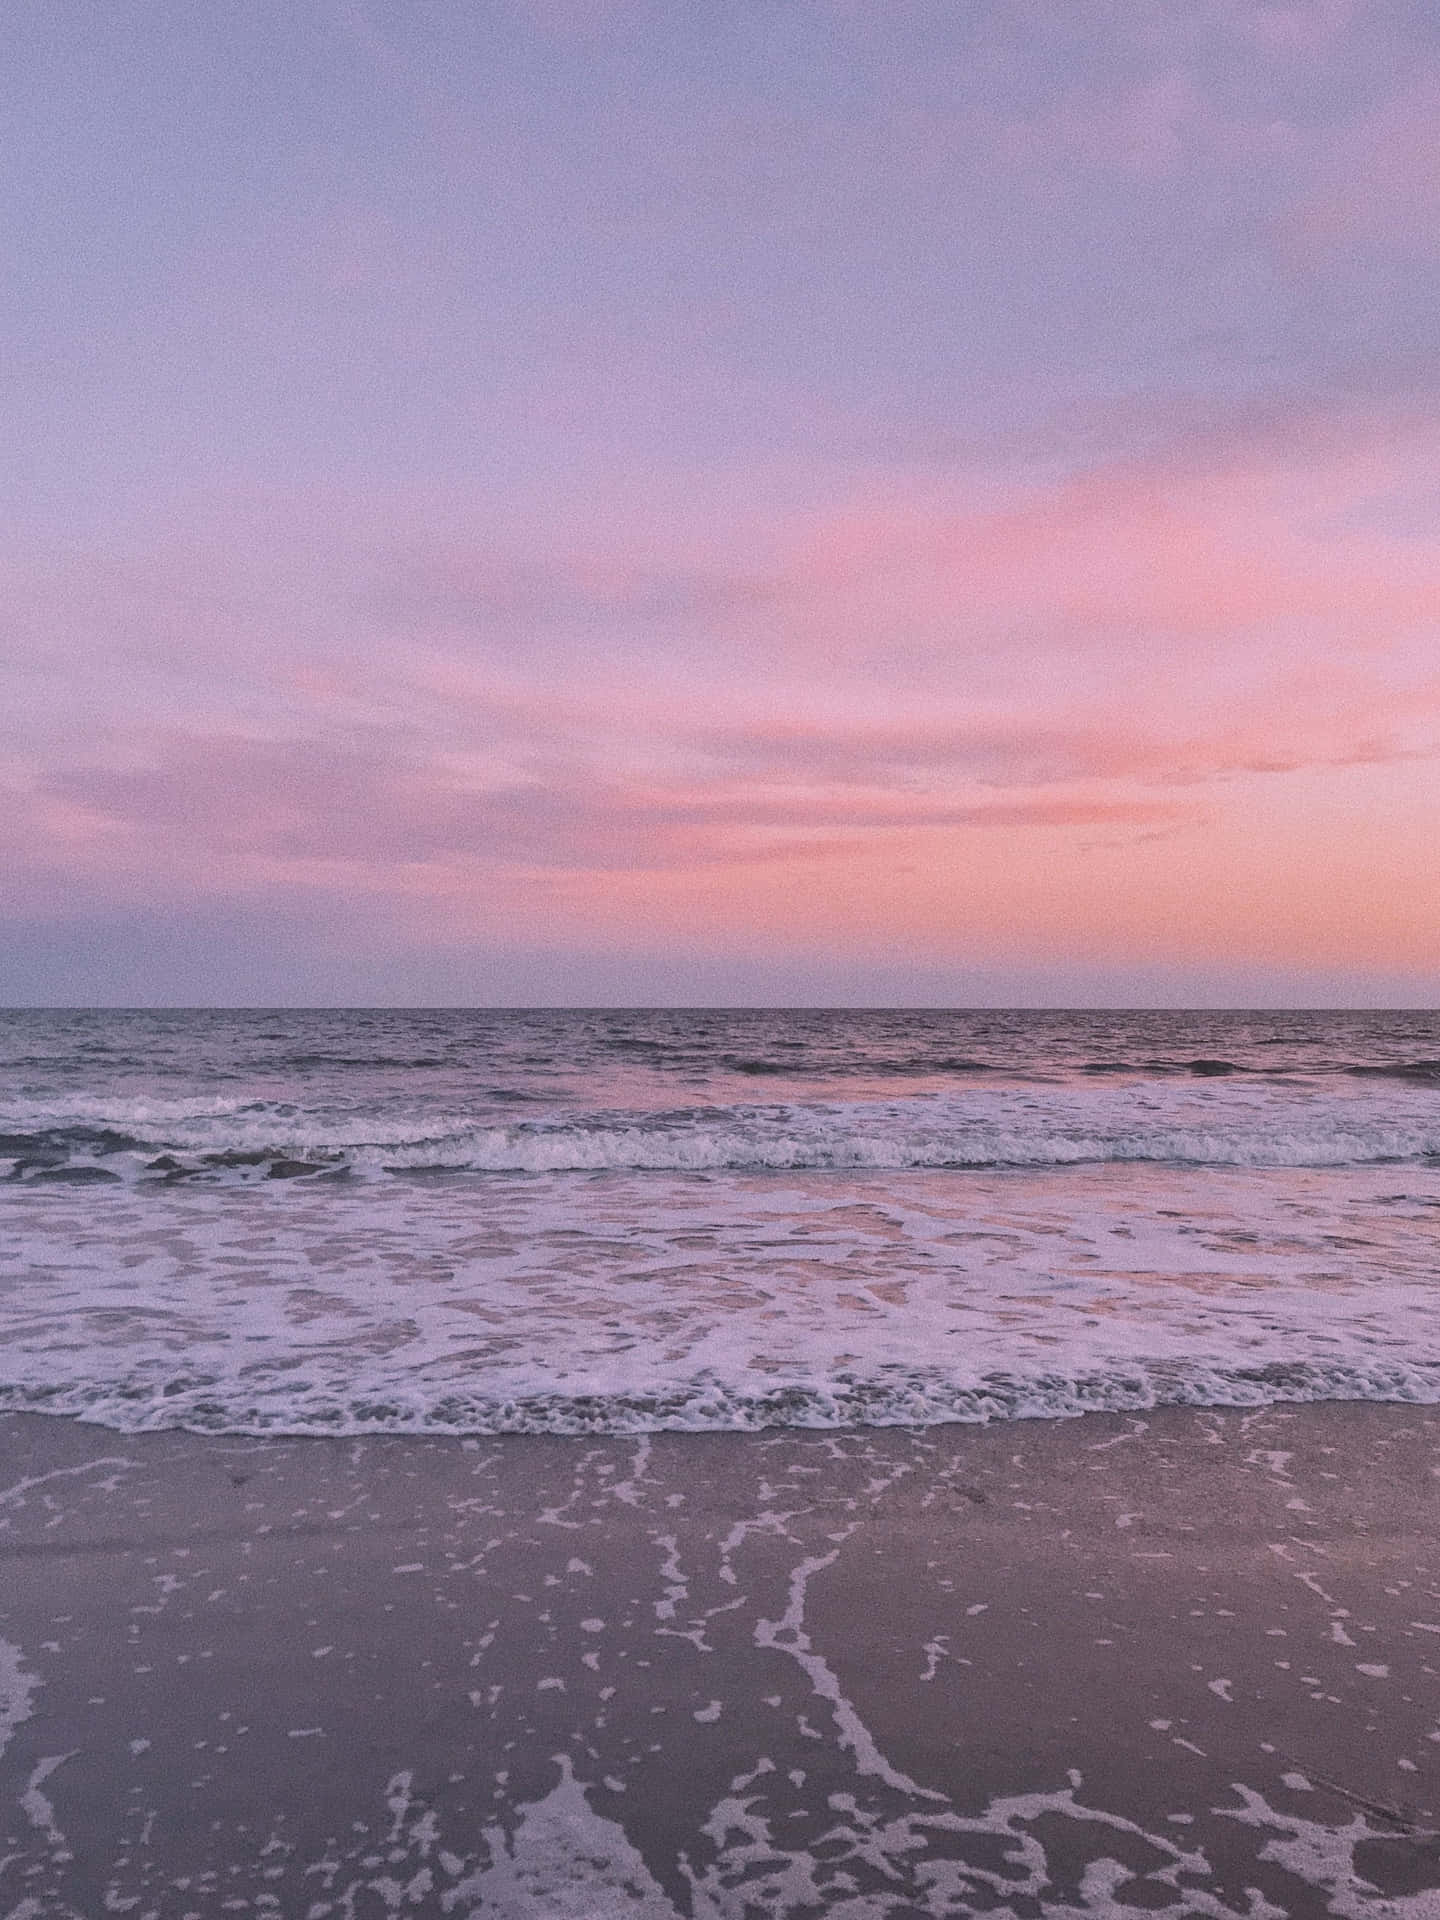 100+] Pink Sunset Wallpapers